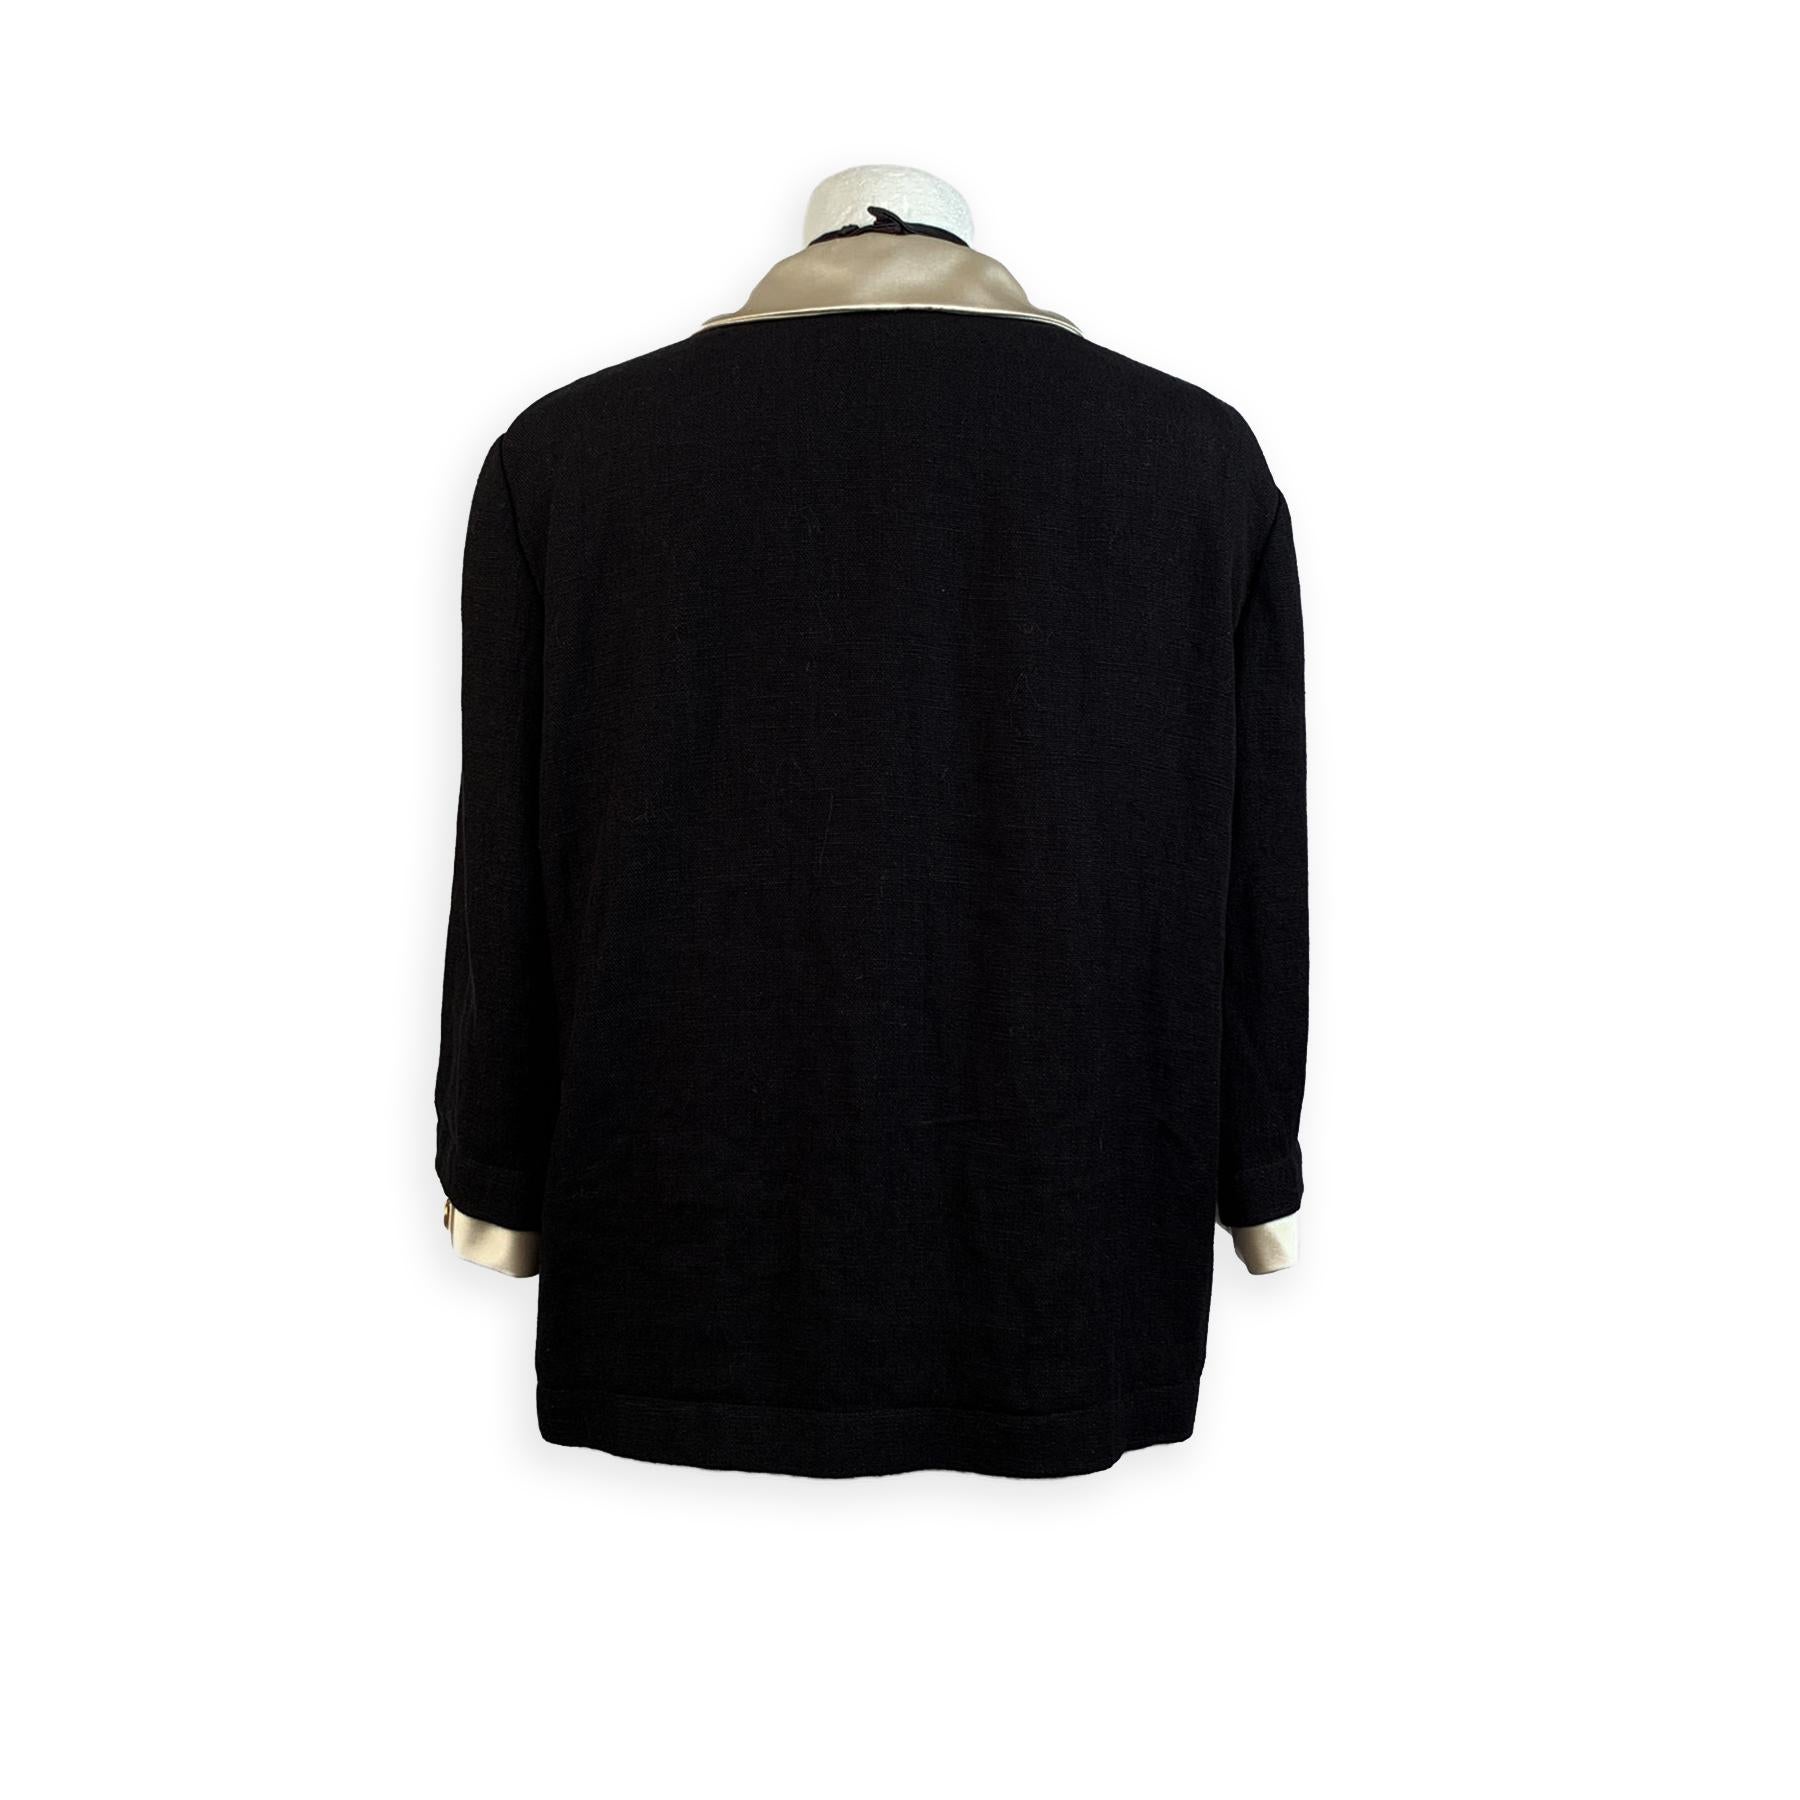 Gucci Black Linen Jacket with Contrast Silk Collar Size 42 1